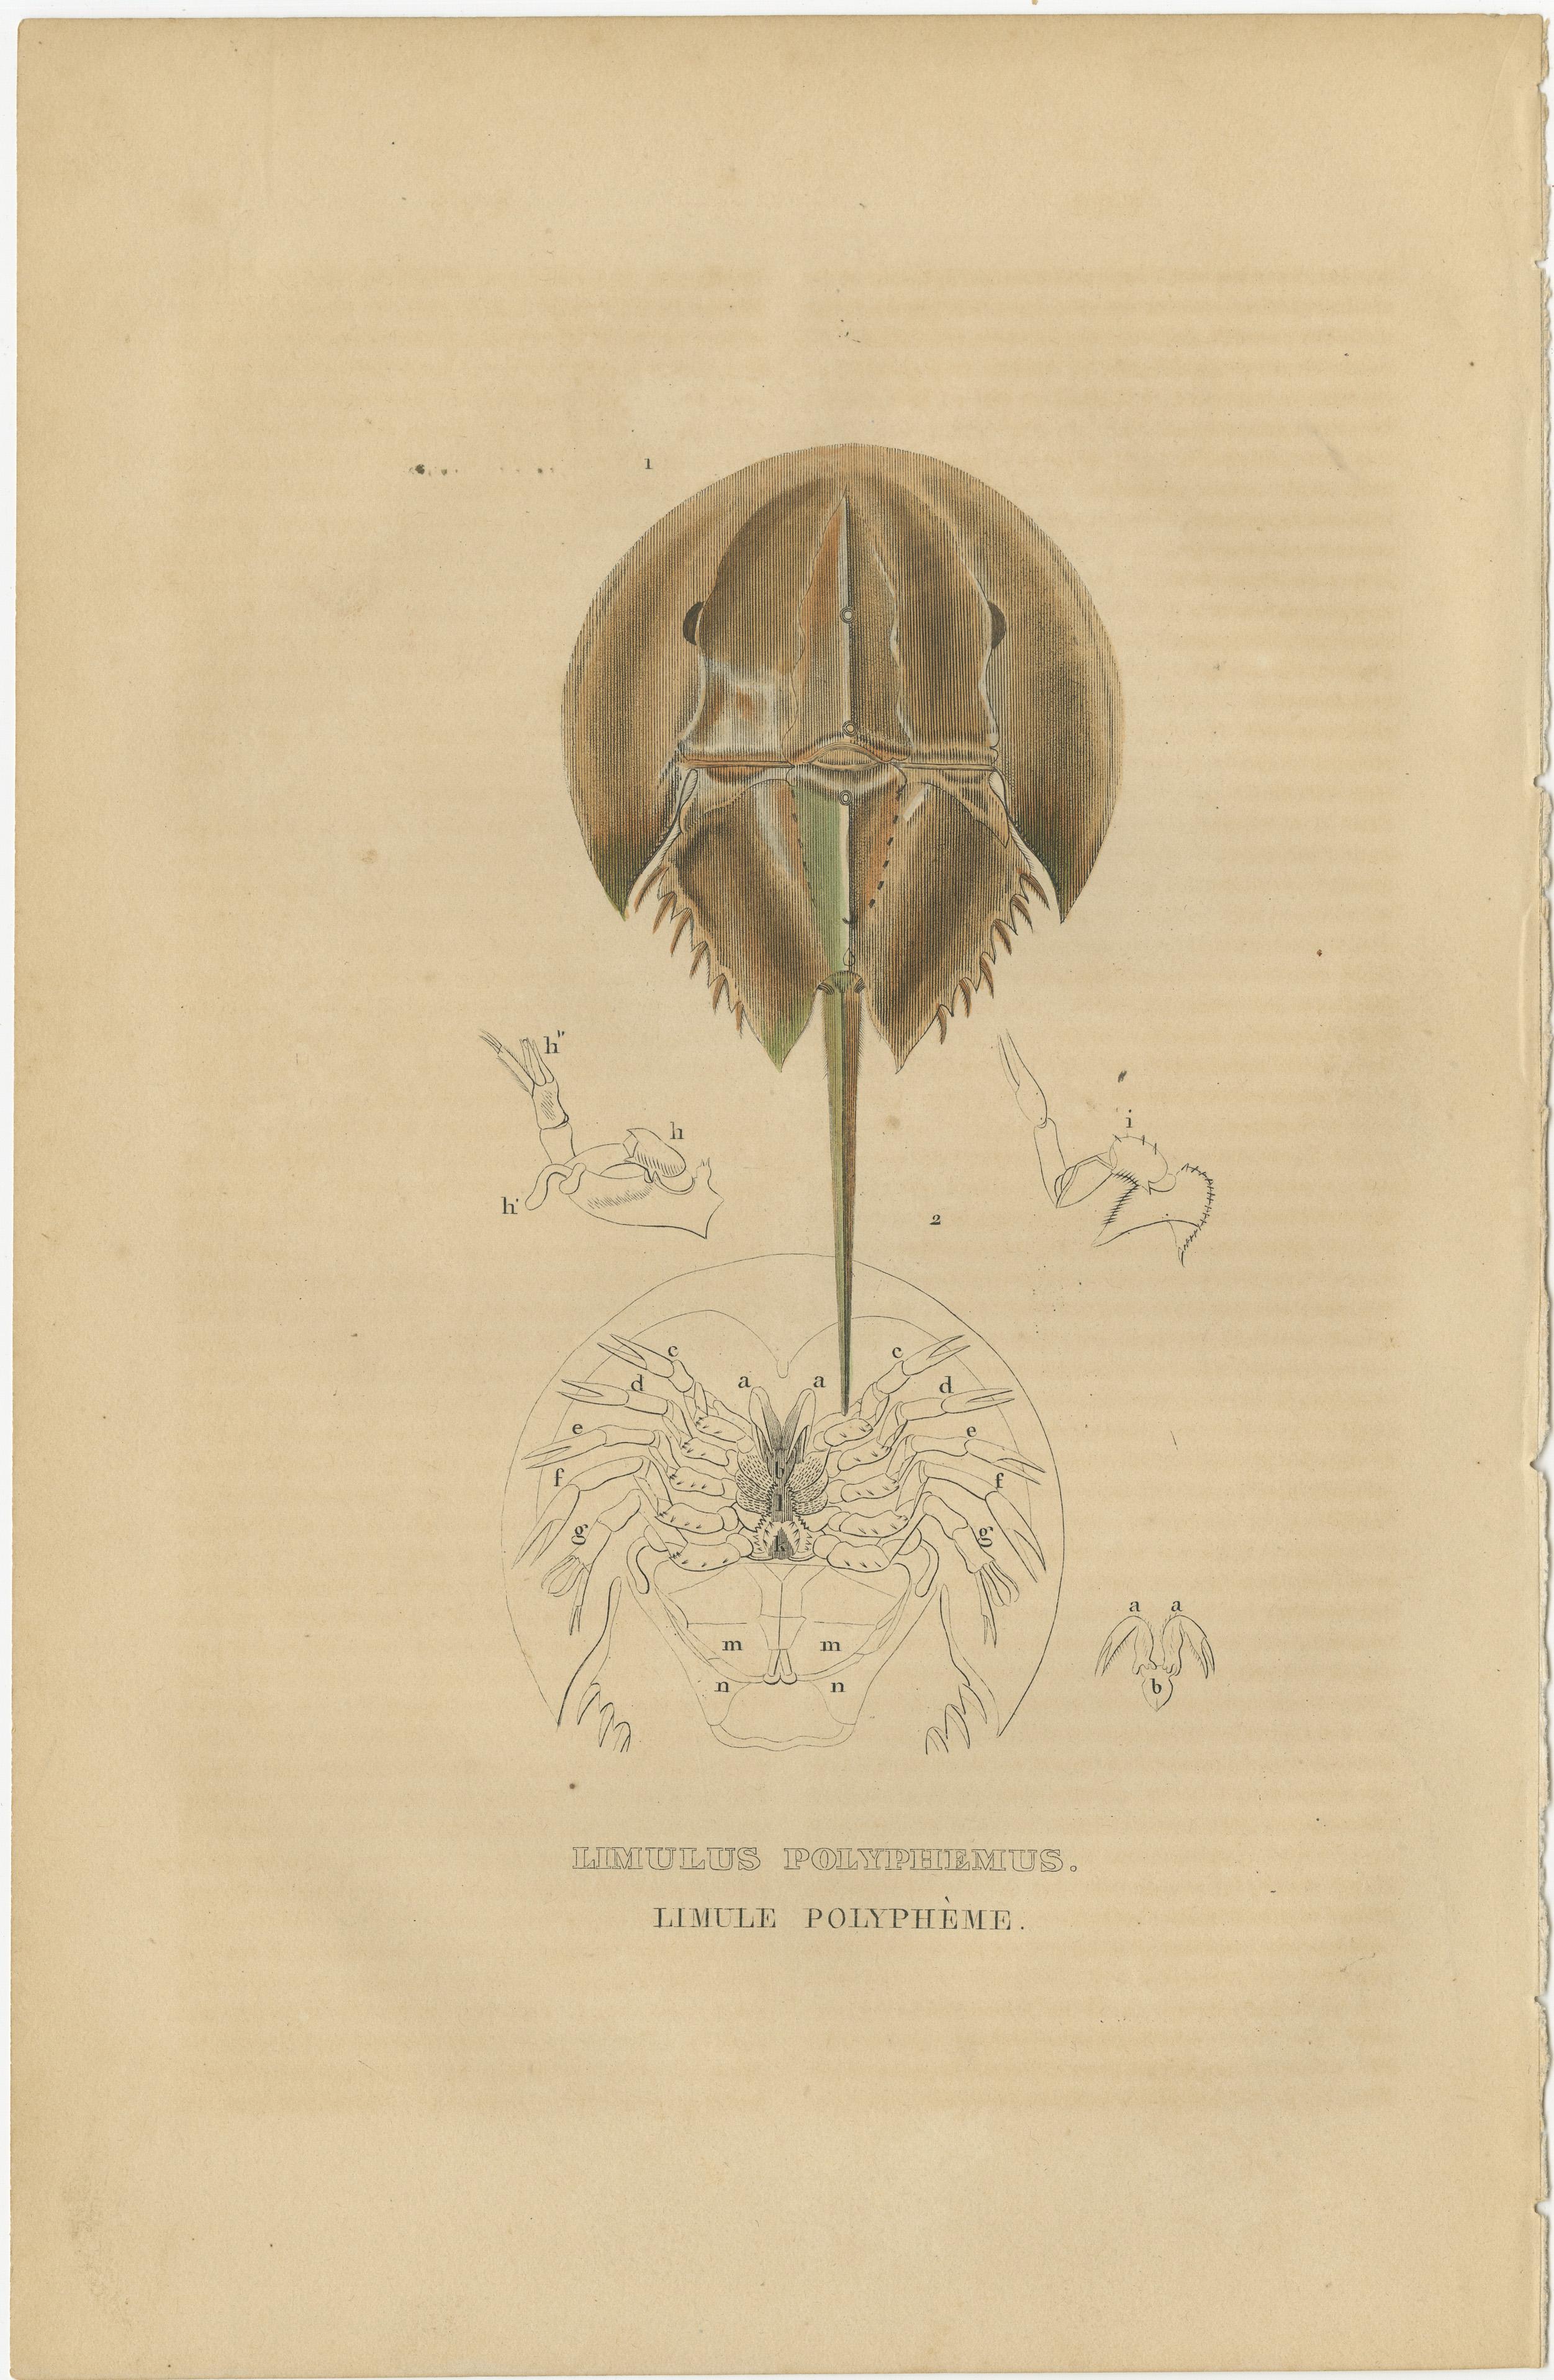 The animal depicted in this print is commonly known as the horseshoe crab, specifically the Limulus polyphemus, also known as the Atlantic horseshoe crab. These marine arthropods are not true crabs but are related to arachnids (spiders and